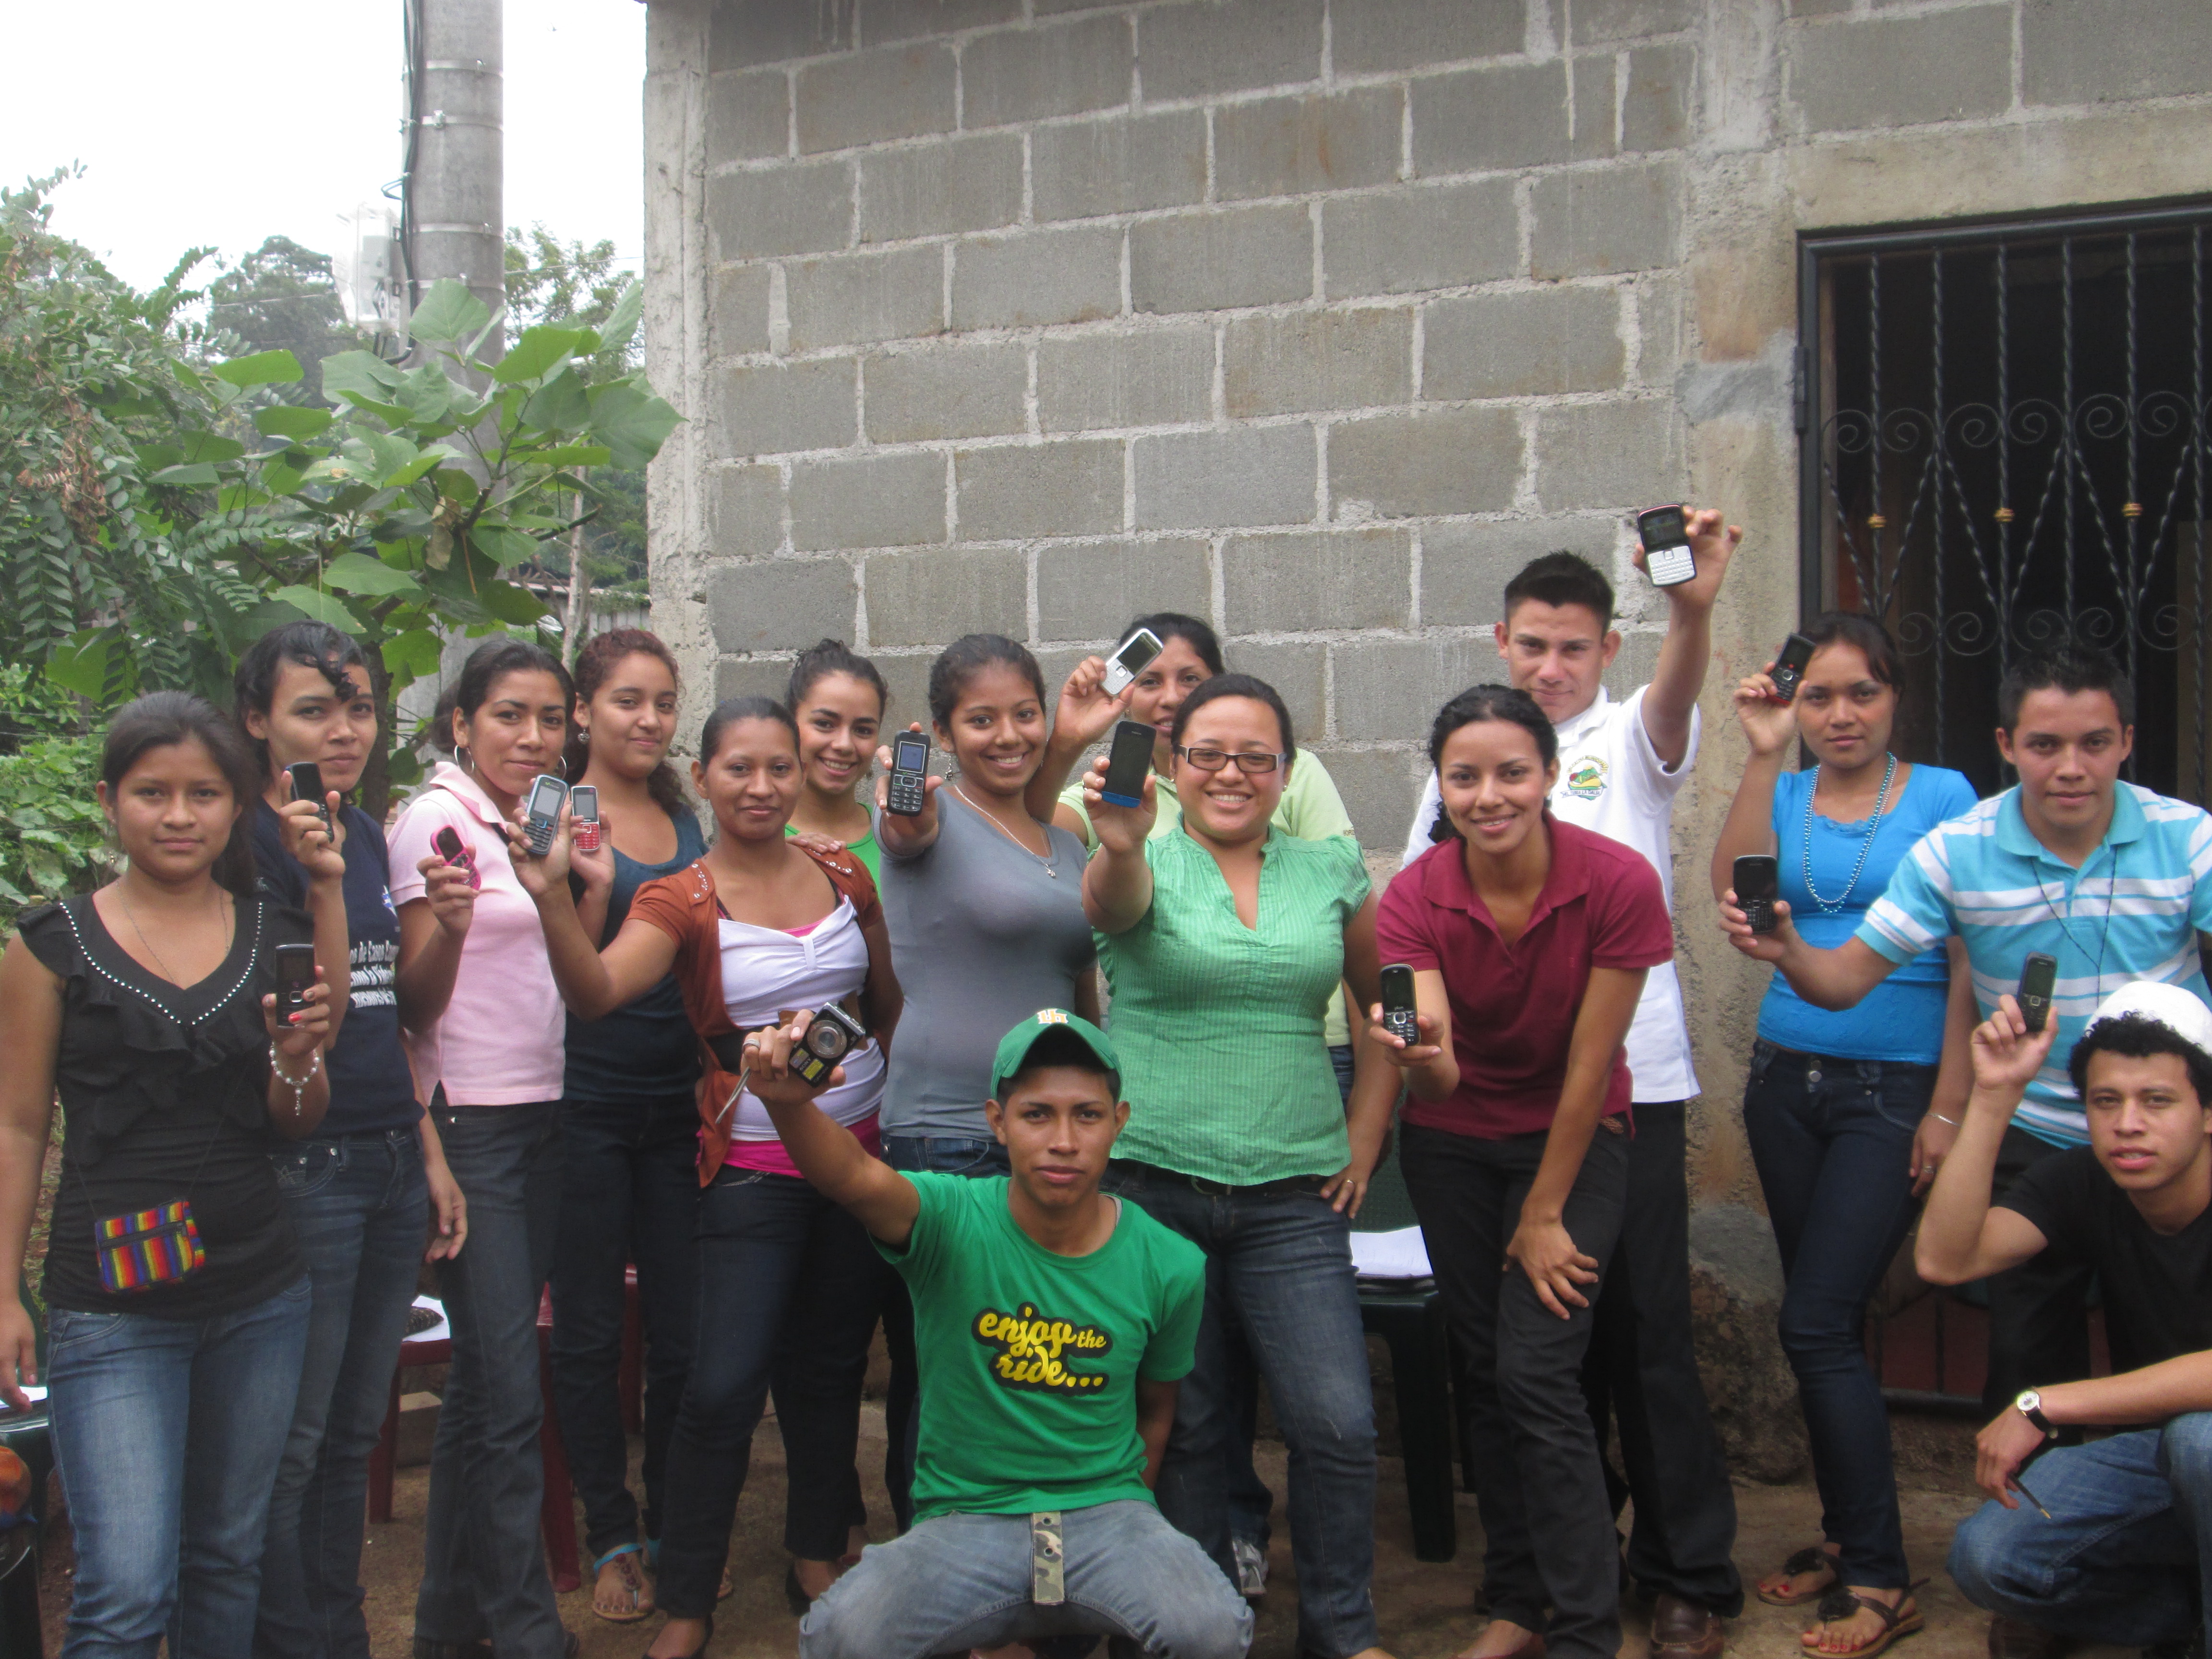 Nicaraguan youth group ready for ChatSalud 2